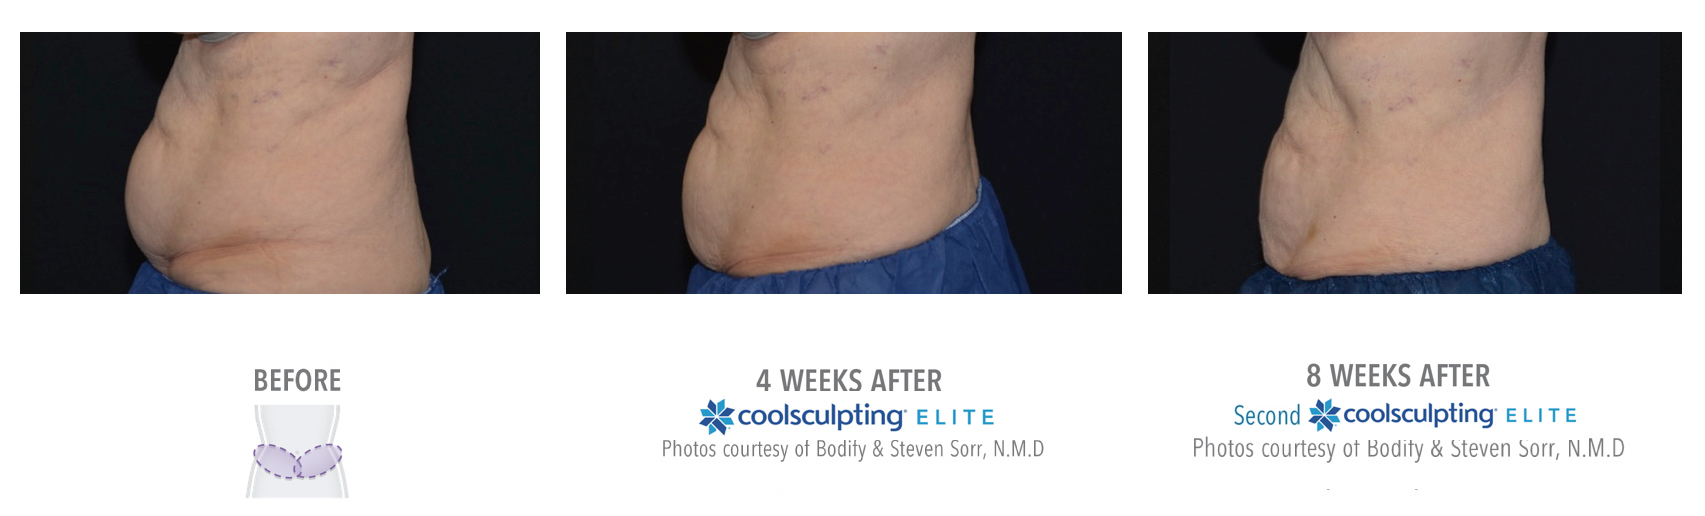 Coolsculpting Treatment Results on Lower abs Female | Melindas Medical Spa & Salon in North Myrtle Beach, SC